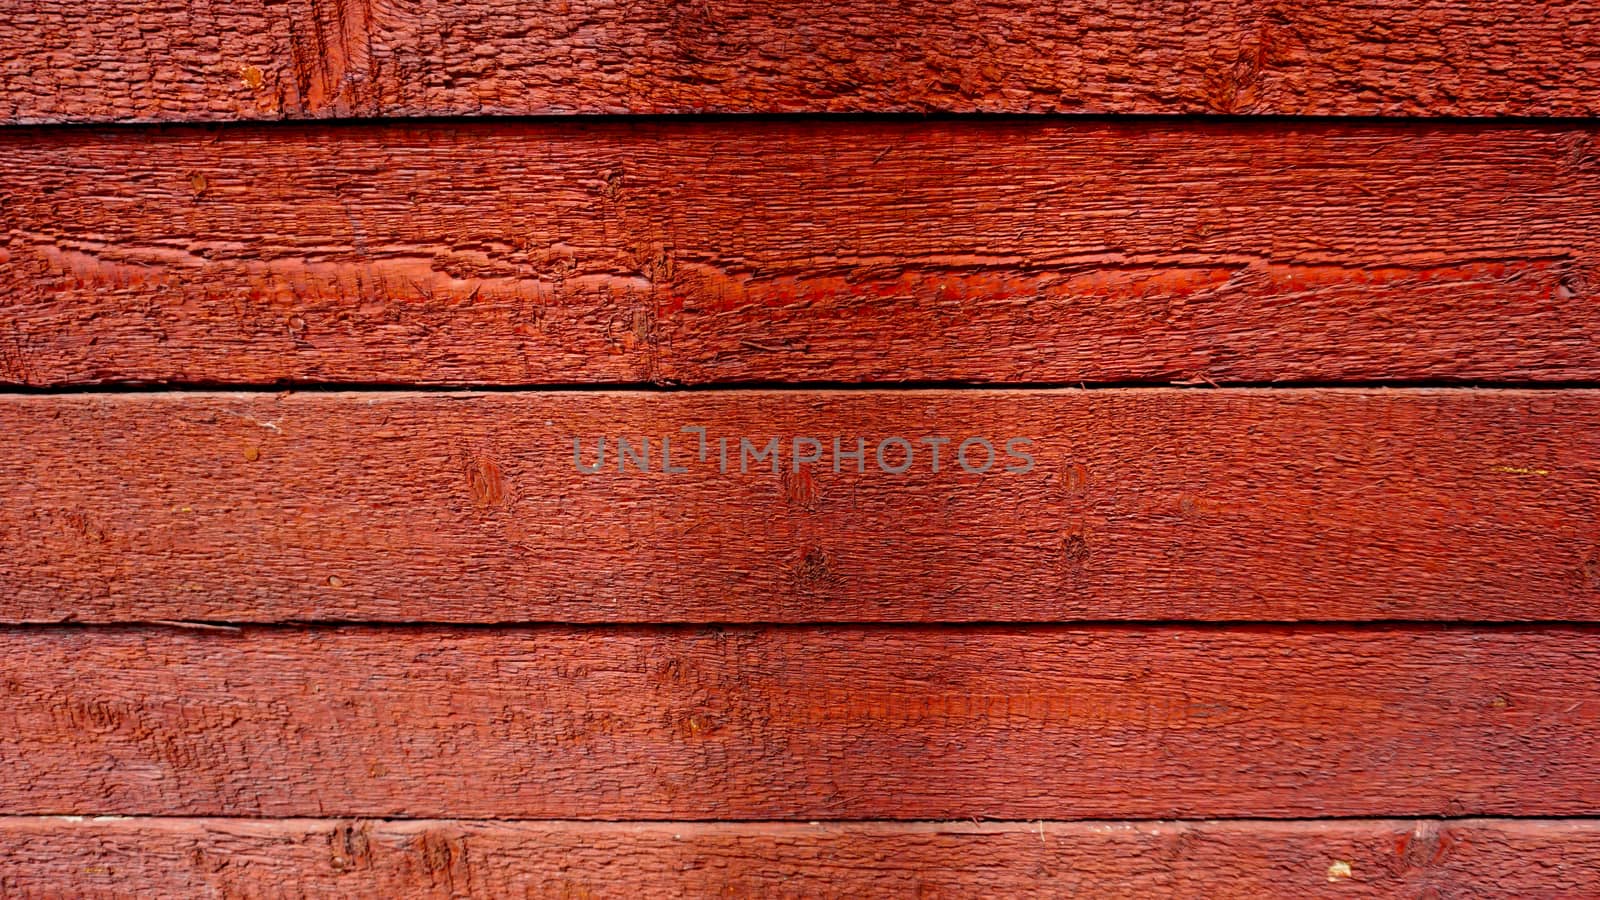 Red wood texture panel